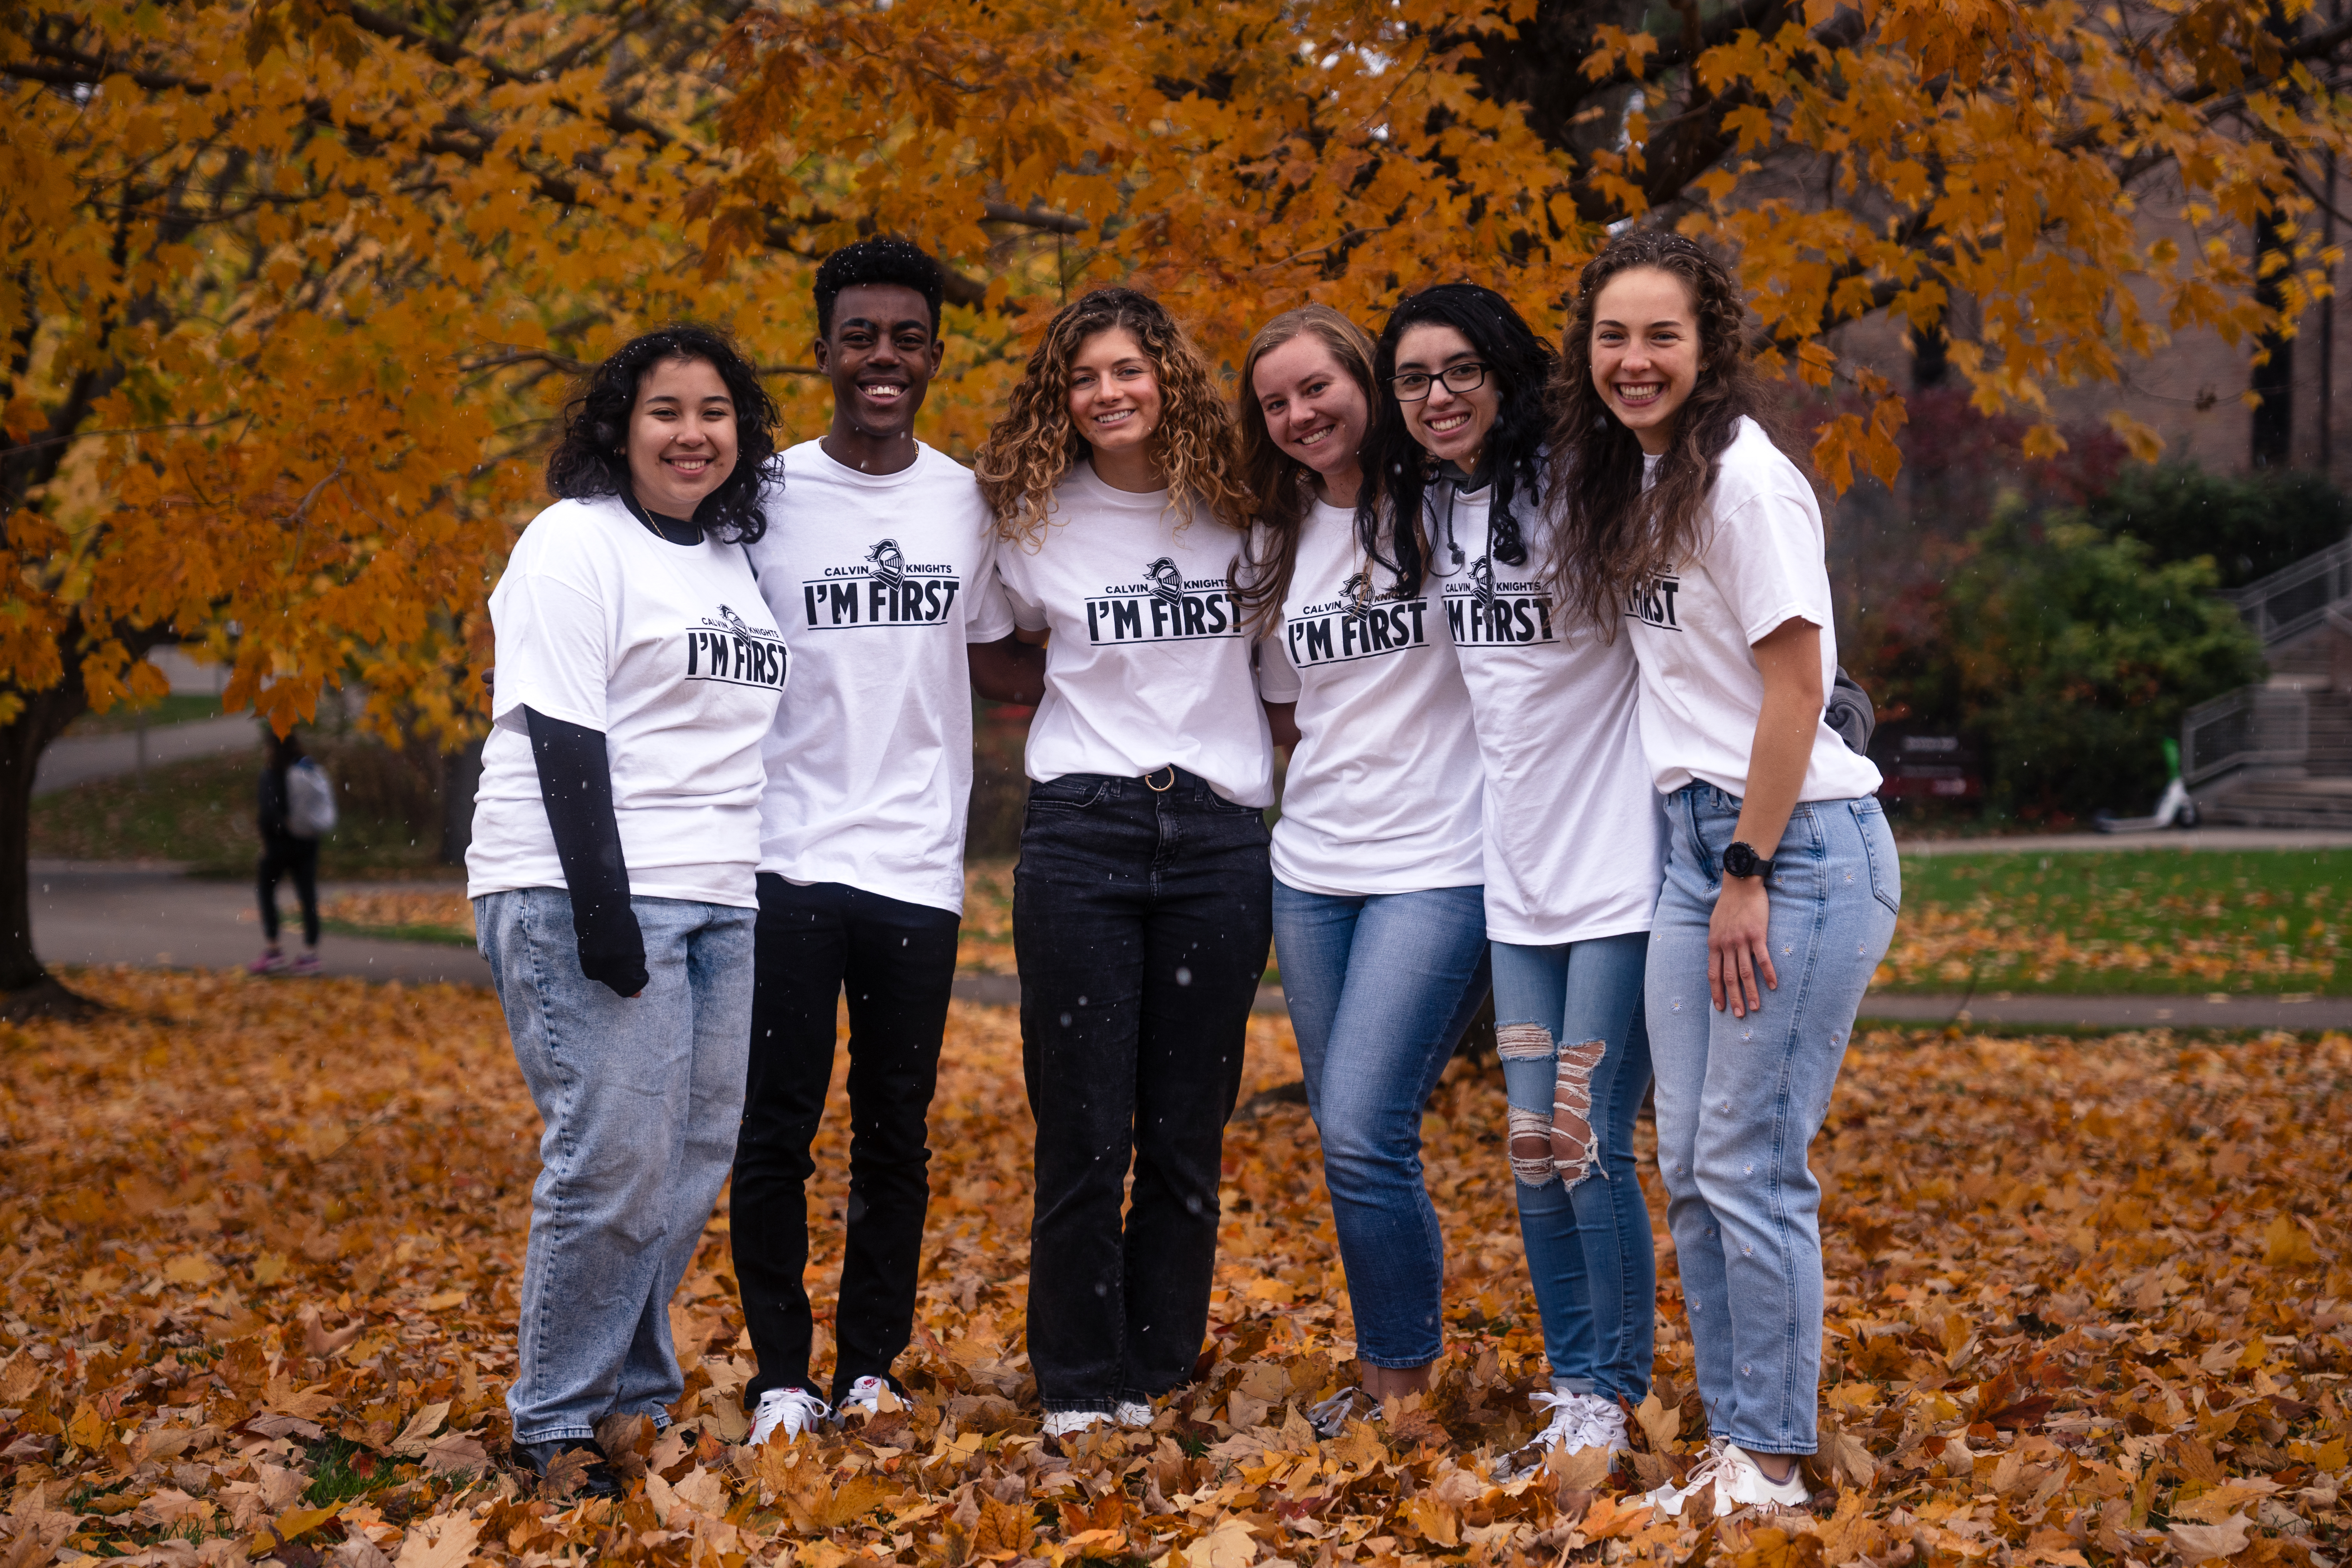 Calvin University students posing in the fall leaves in campus